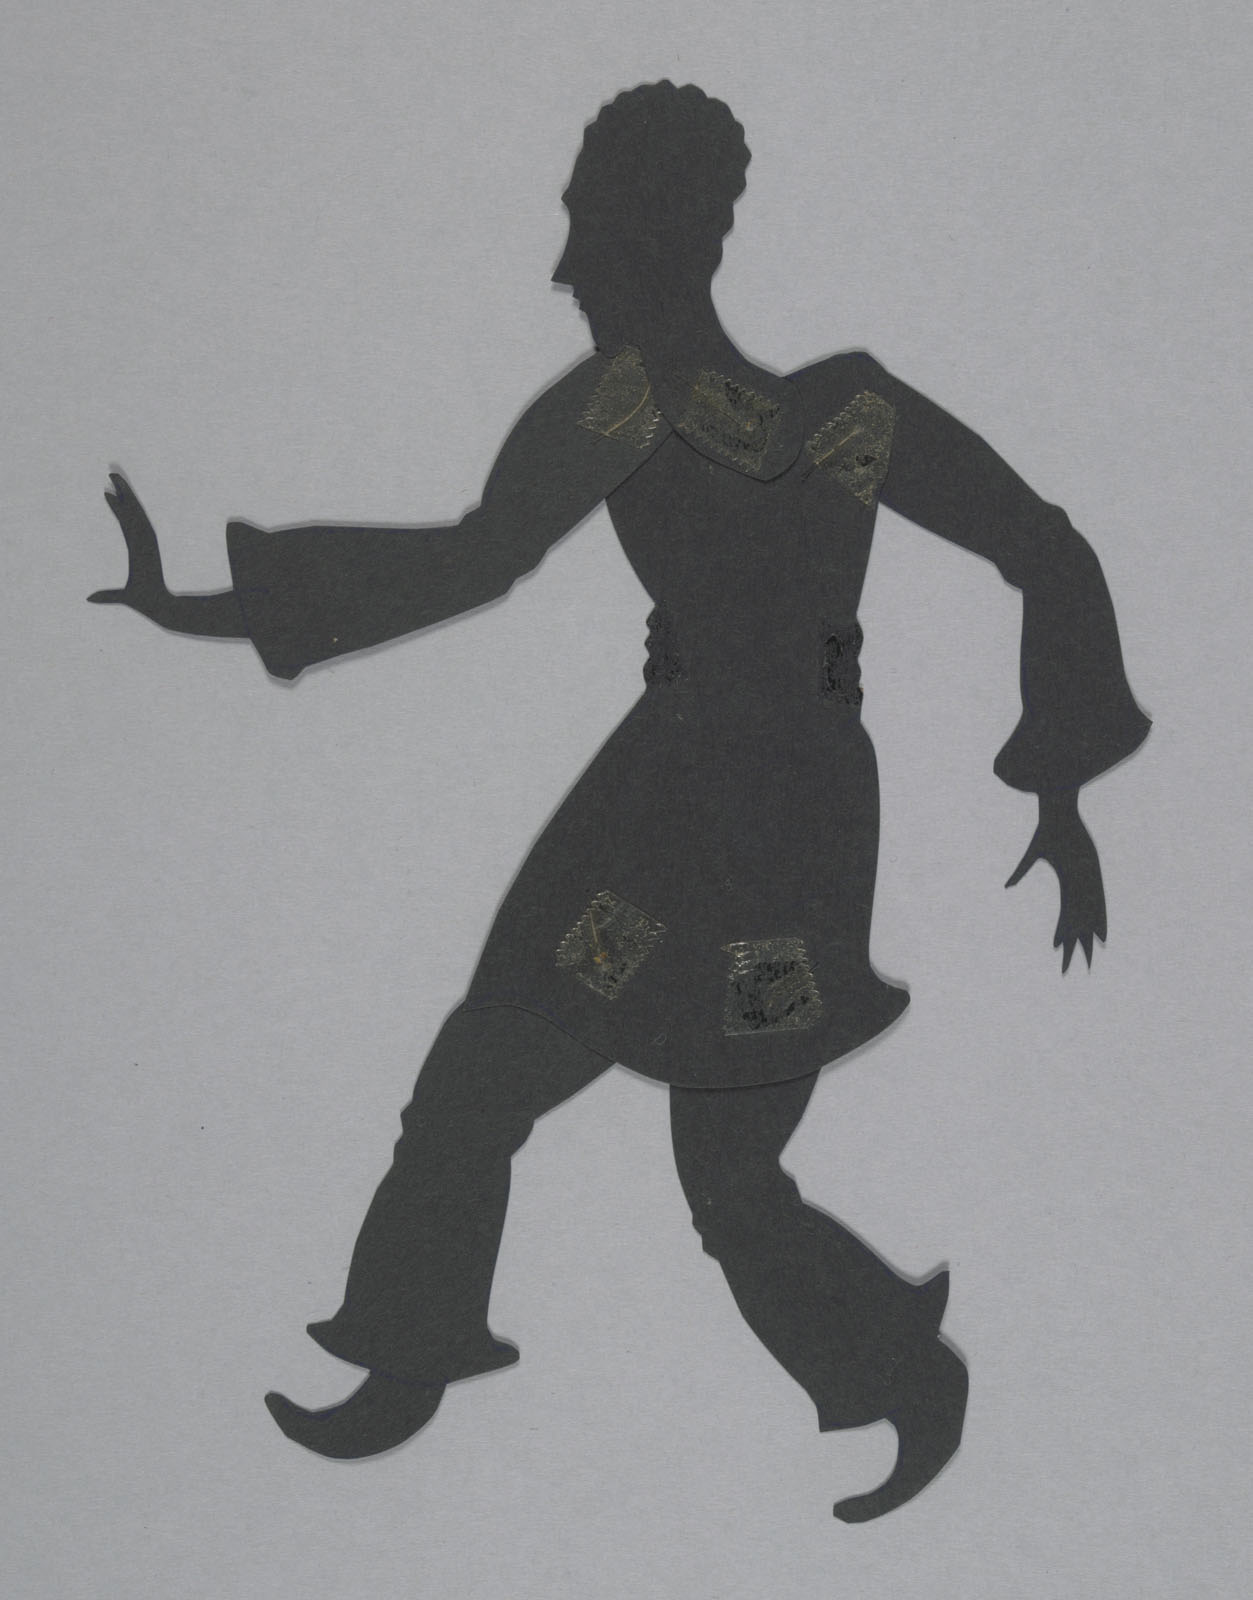 Ofuji's trial cutouts inspired by <i>The Adventures of Prince Achmed</i> (1926)